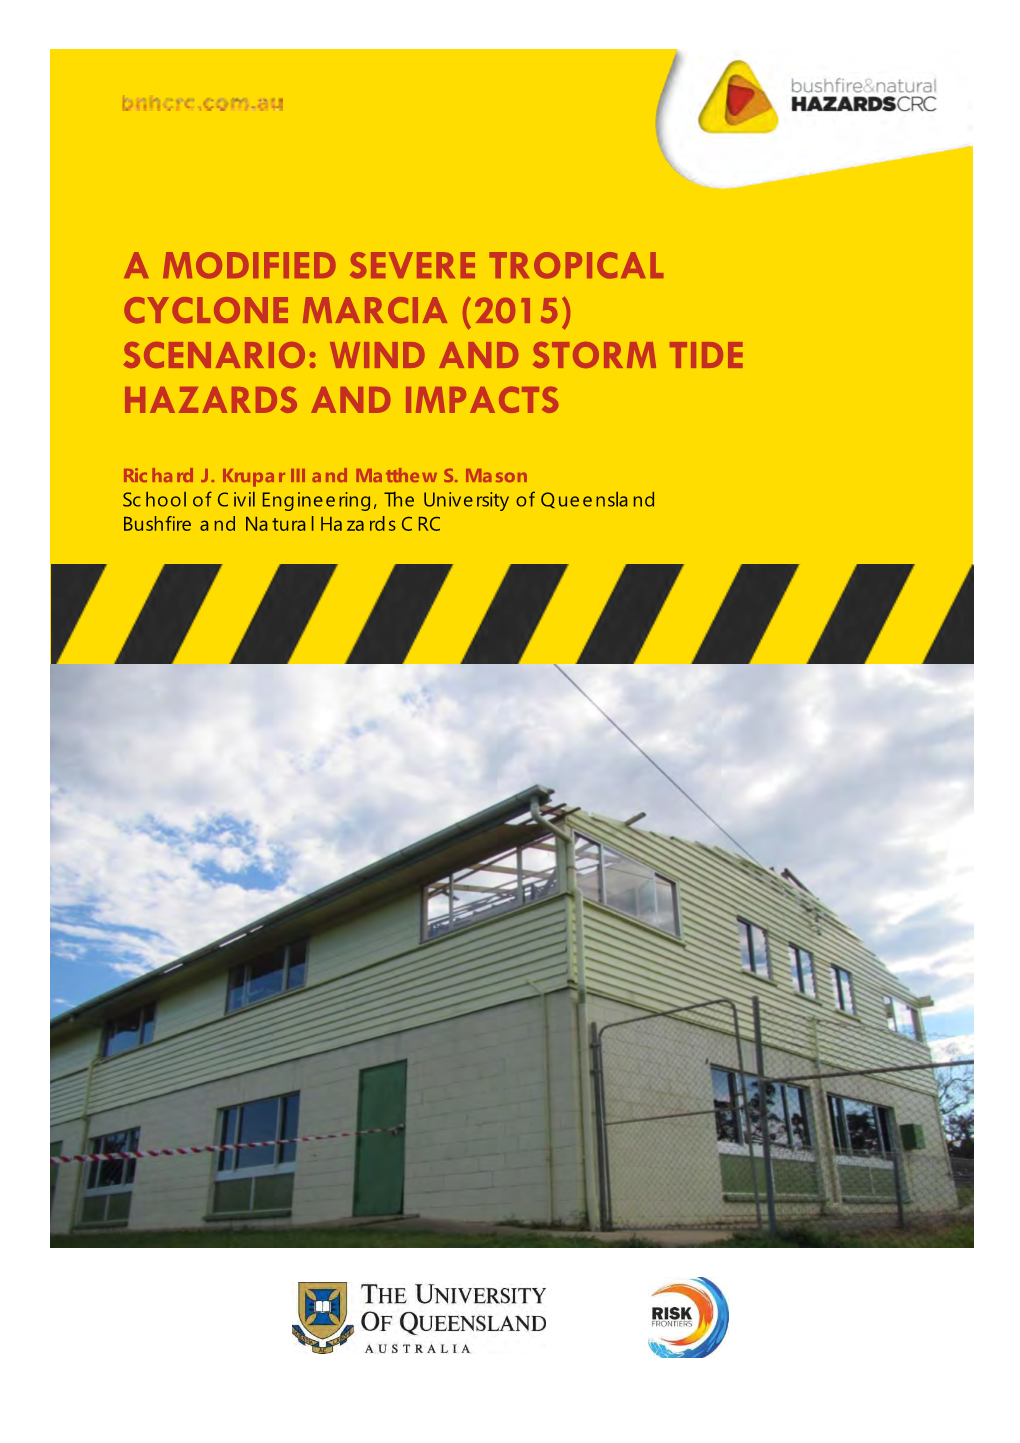 A MODIFIED SEVERE TROPICAL CYCLONE MARCIA (2015) SCENARIO: WIND and STORM TIDE HAZARDS and IMPACTS Orrichard Deleted J